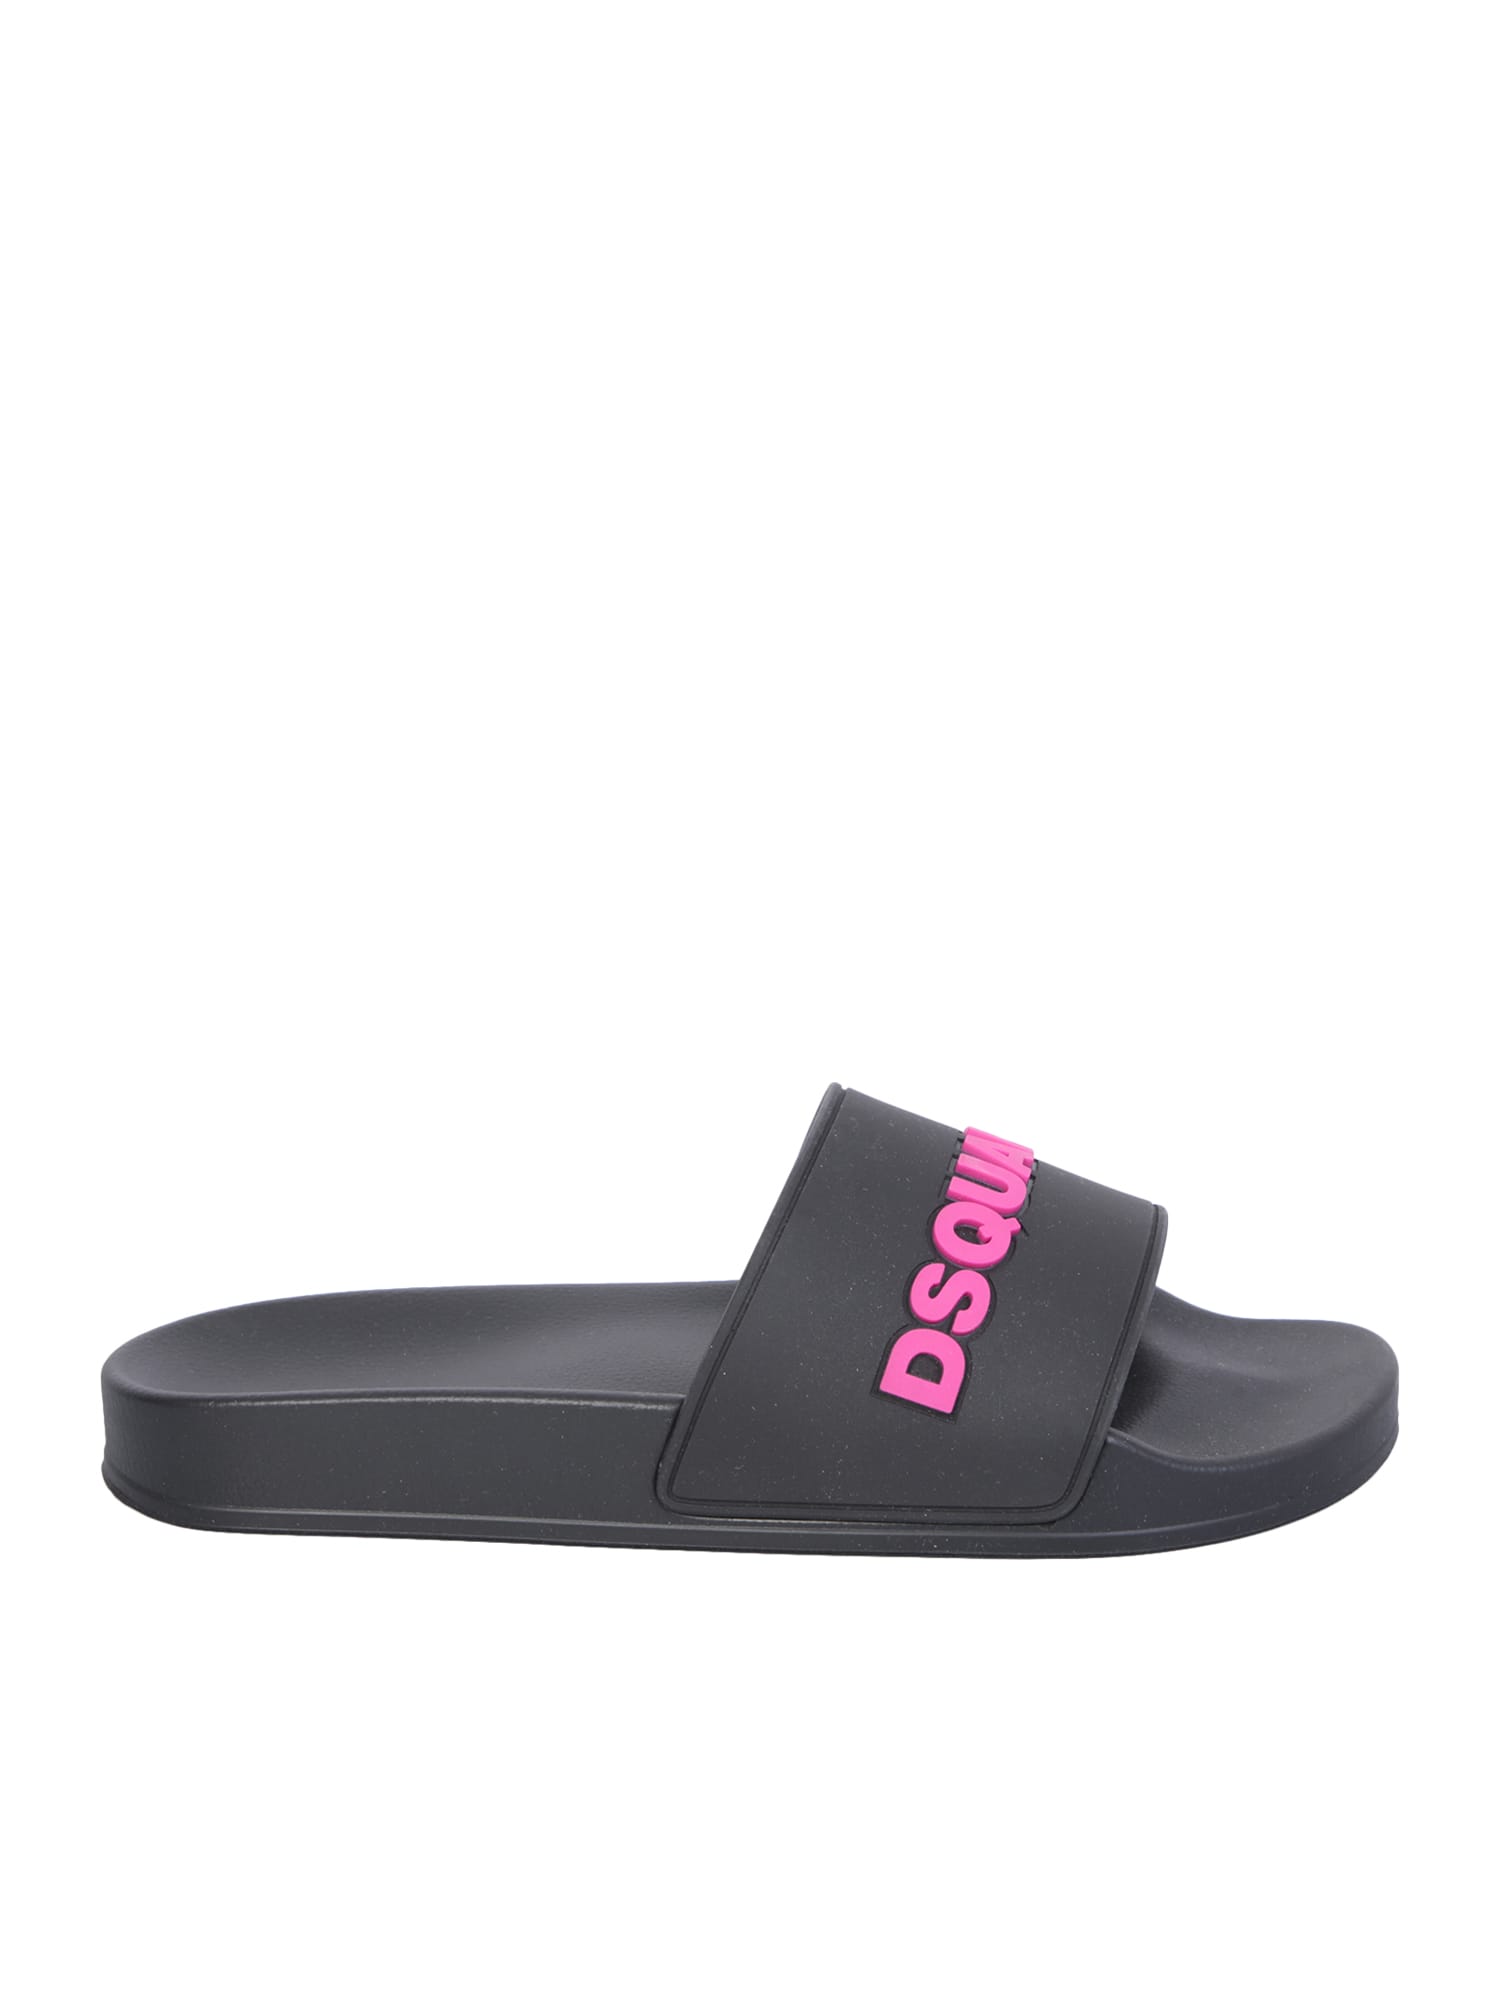 DSQUARED2 BLACK AND FUXIA POOL SLIDES